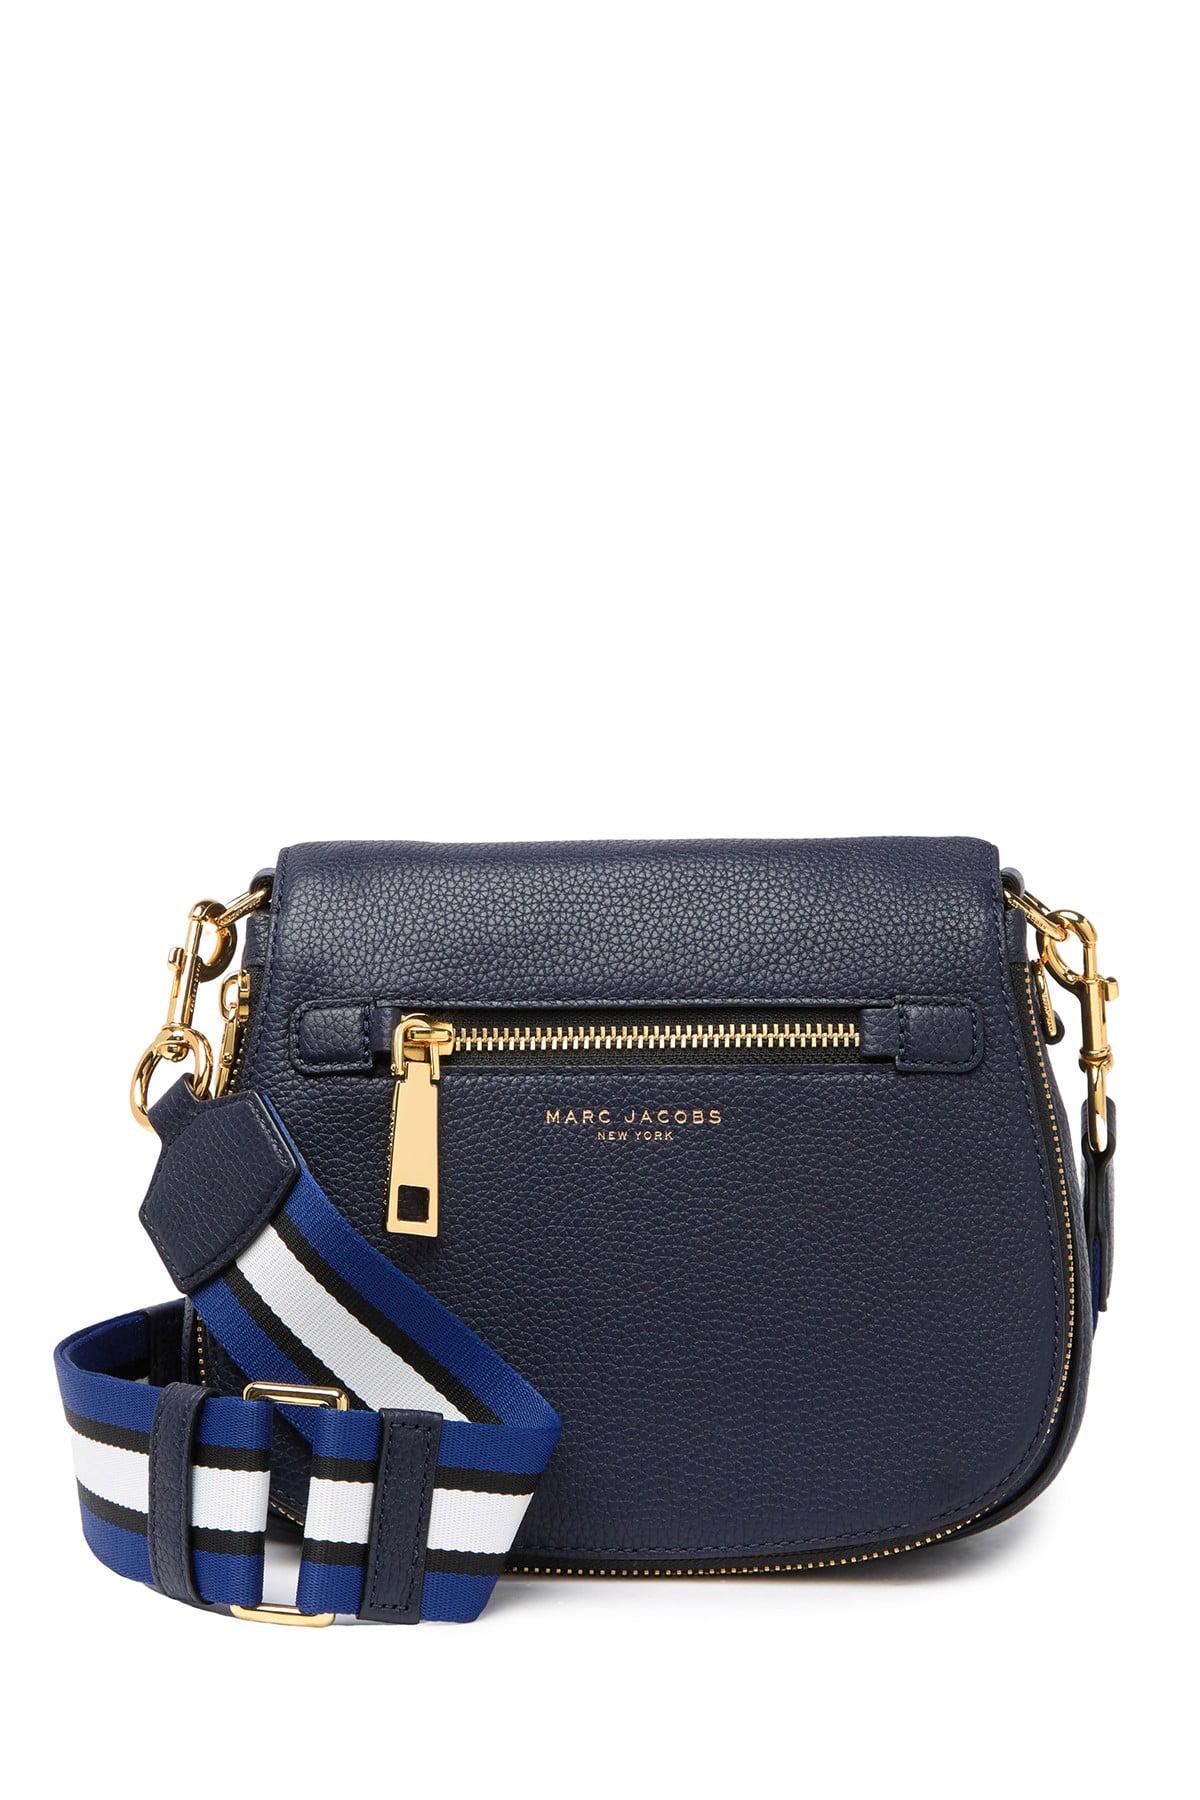 Marc Jacobs Gotham Small Nomad Crossbody Bag in Blue | Lyst